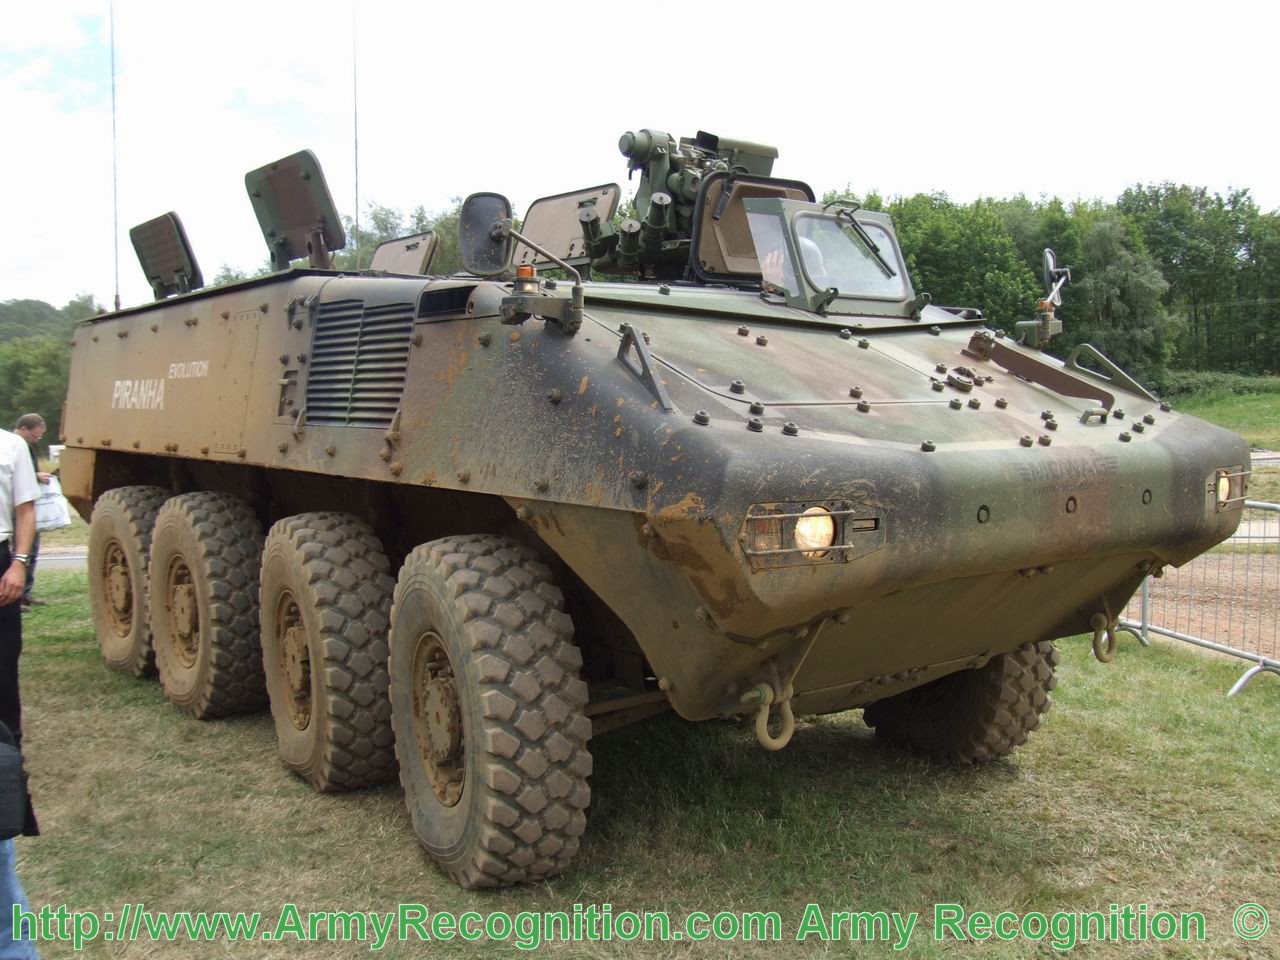 Magazine Army Recognition N°9 disponible maintenant Piranha_IIIC_armoured_personnel_carrier_Switzerland_Army_Recognition_9_012